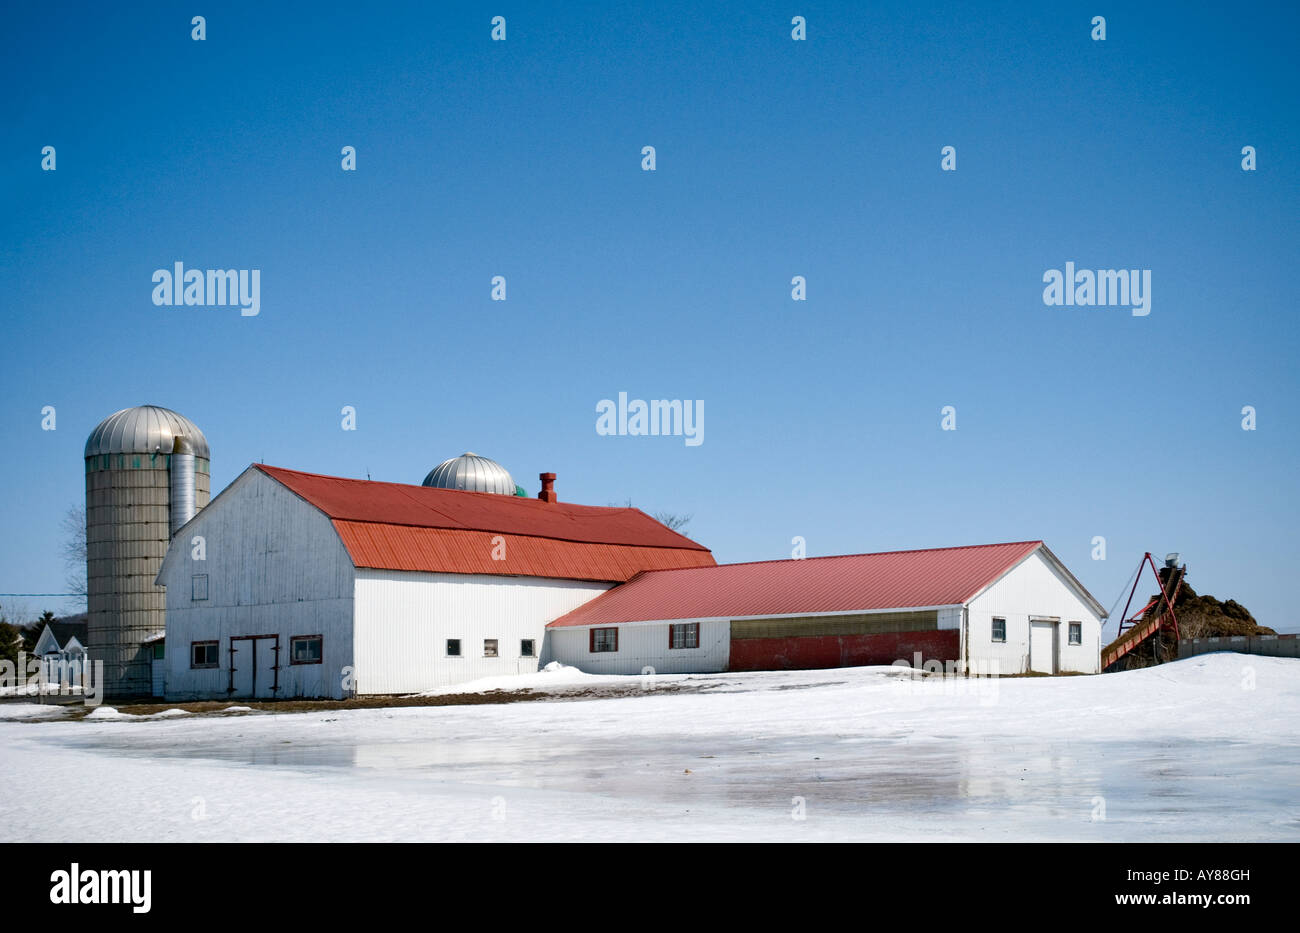 A farmstead on April 2 2008 in Rougemont, Quebec, Canada. Stock Photo